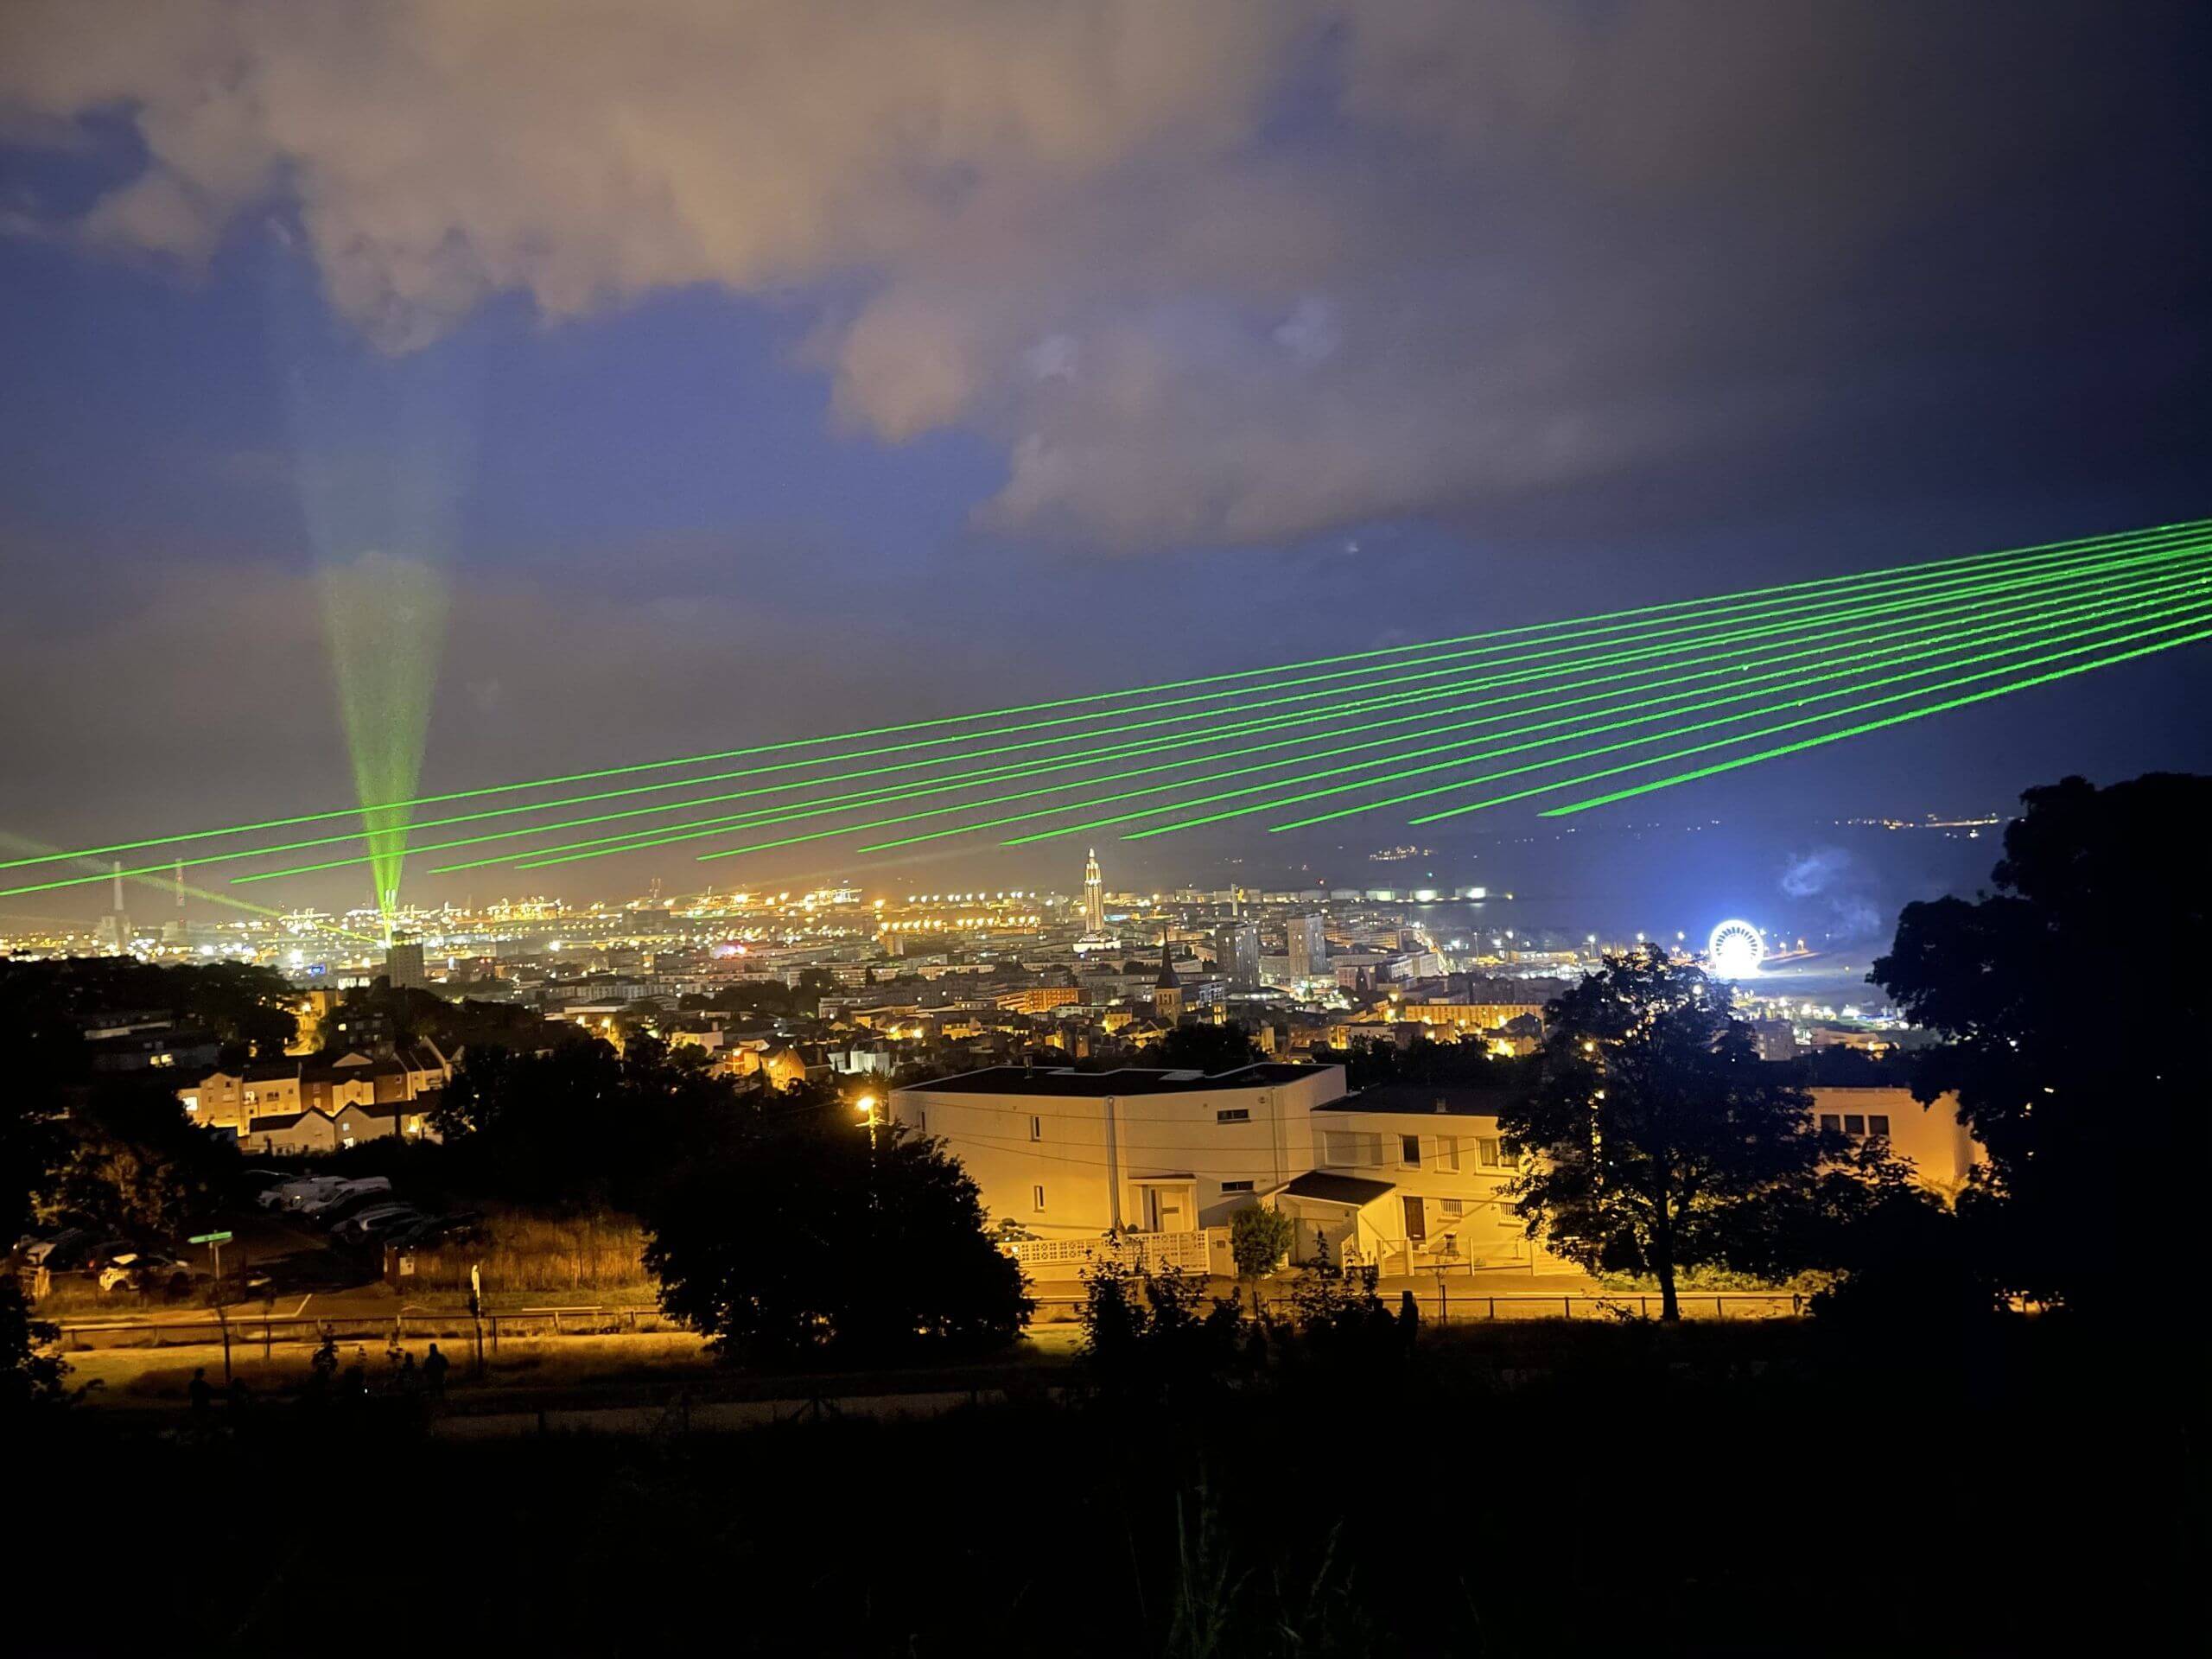 Europe Évènement - laser show - Photo of green laser beams projected over a city in Le Havre